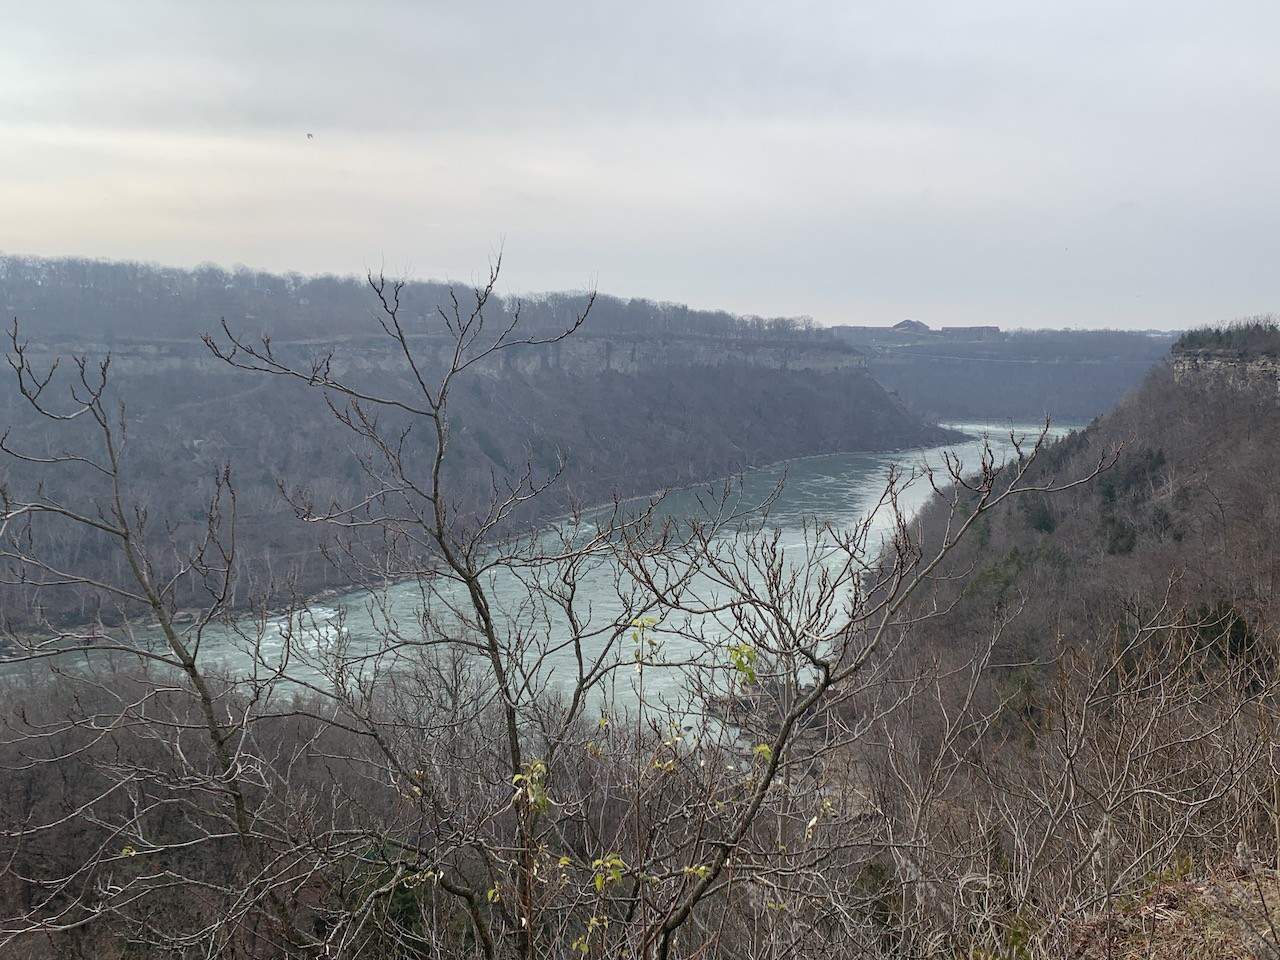 View of the Niagara River in Niagara Falls Ontario - When you park your car, there is a trail along the top of the Niagara Gorge where visitors can take in this view of the Niagara River in Niagara Falls, Ontario, Canada.